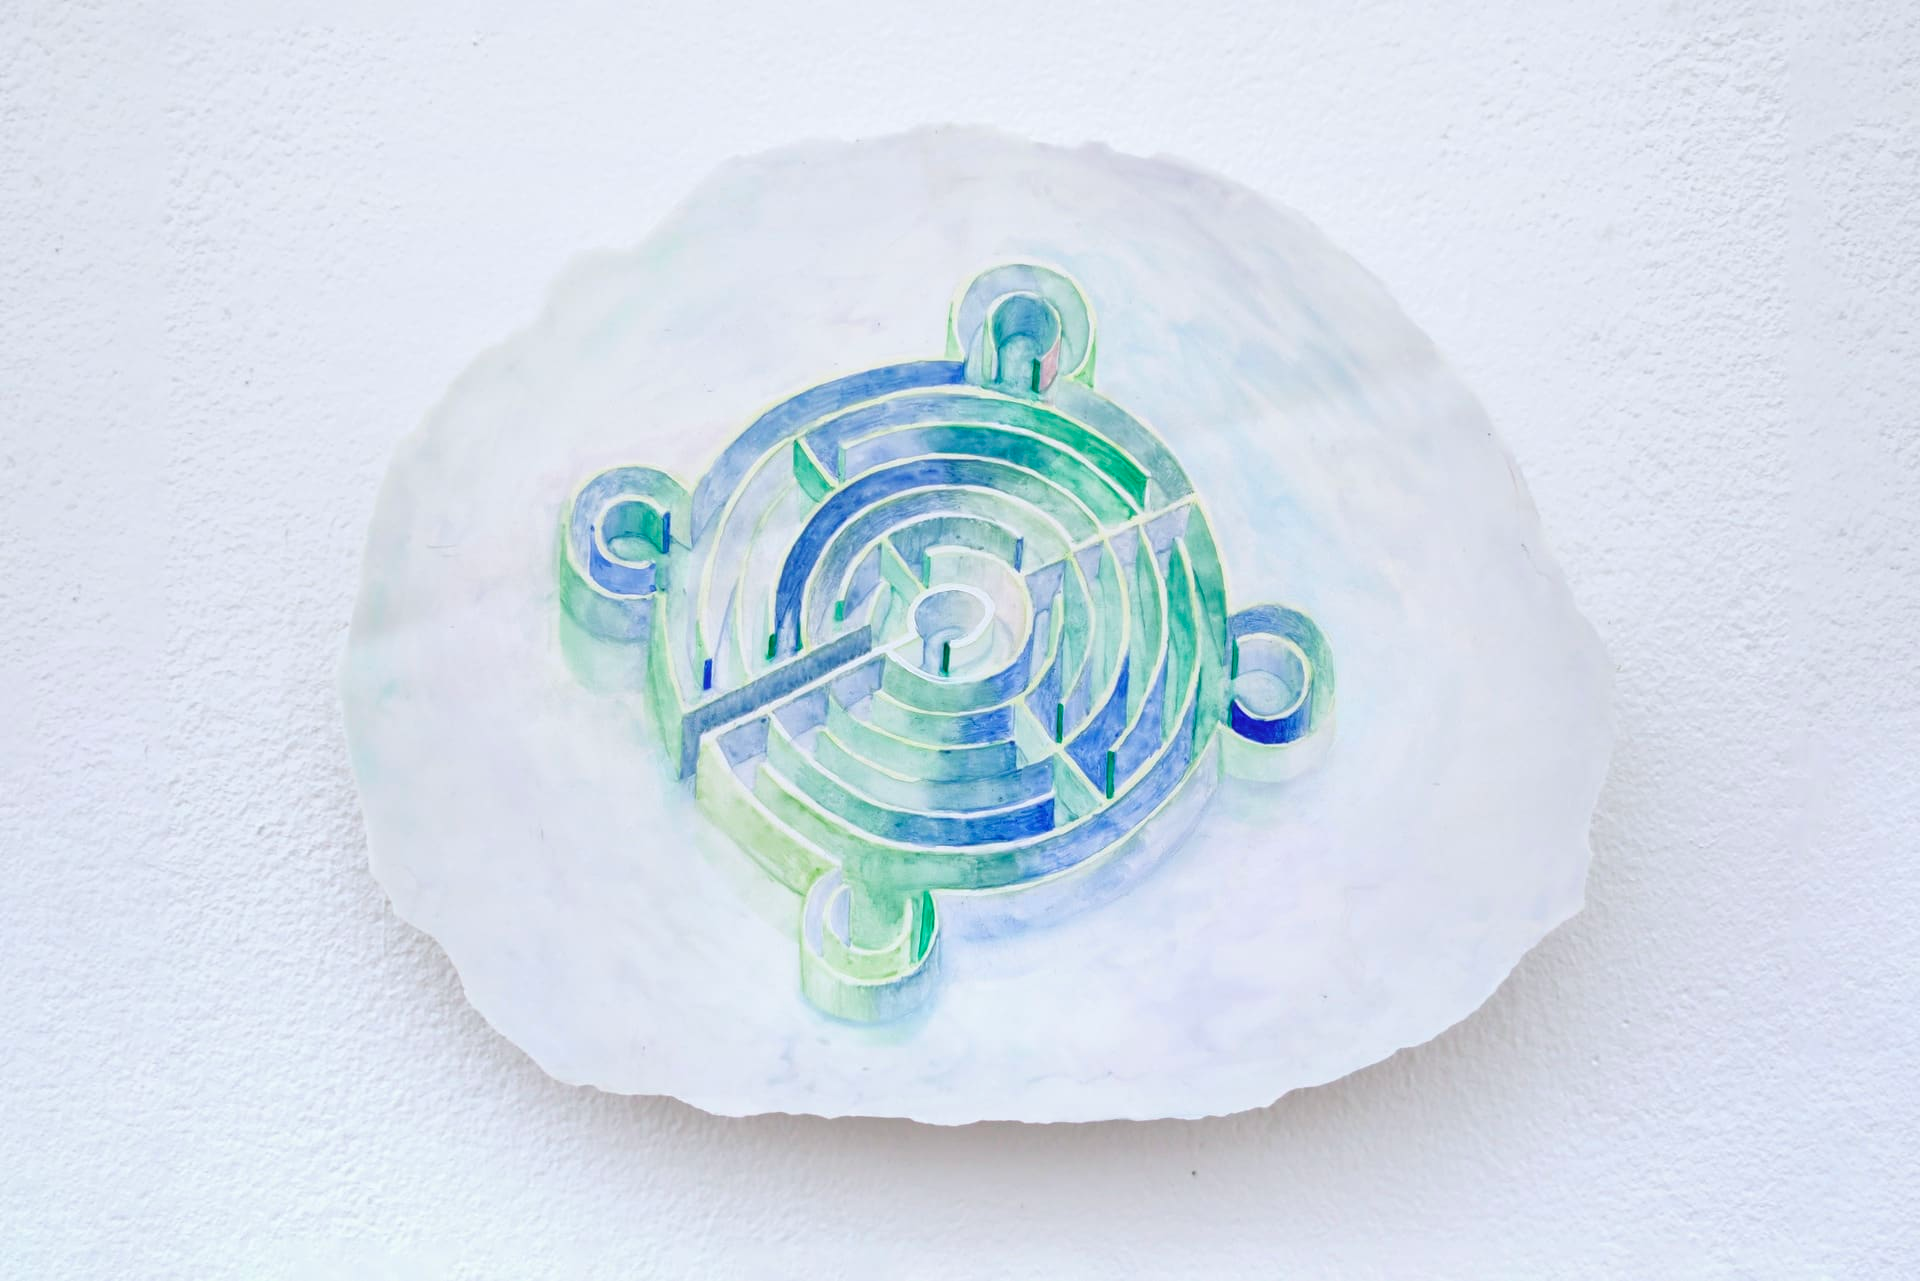 Image of a blue and green circular maze-like object, inside what looks like a round white dish or bowl, with a jagged edge, on a white textured background.